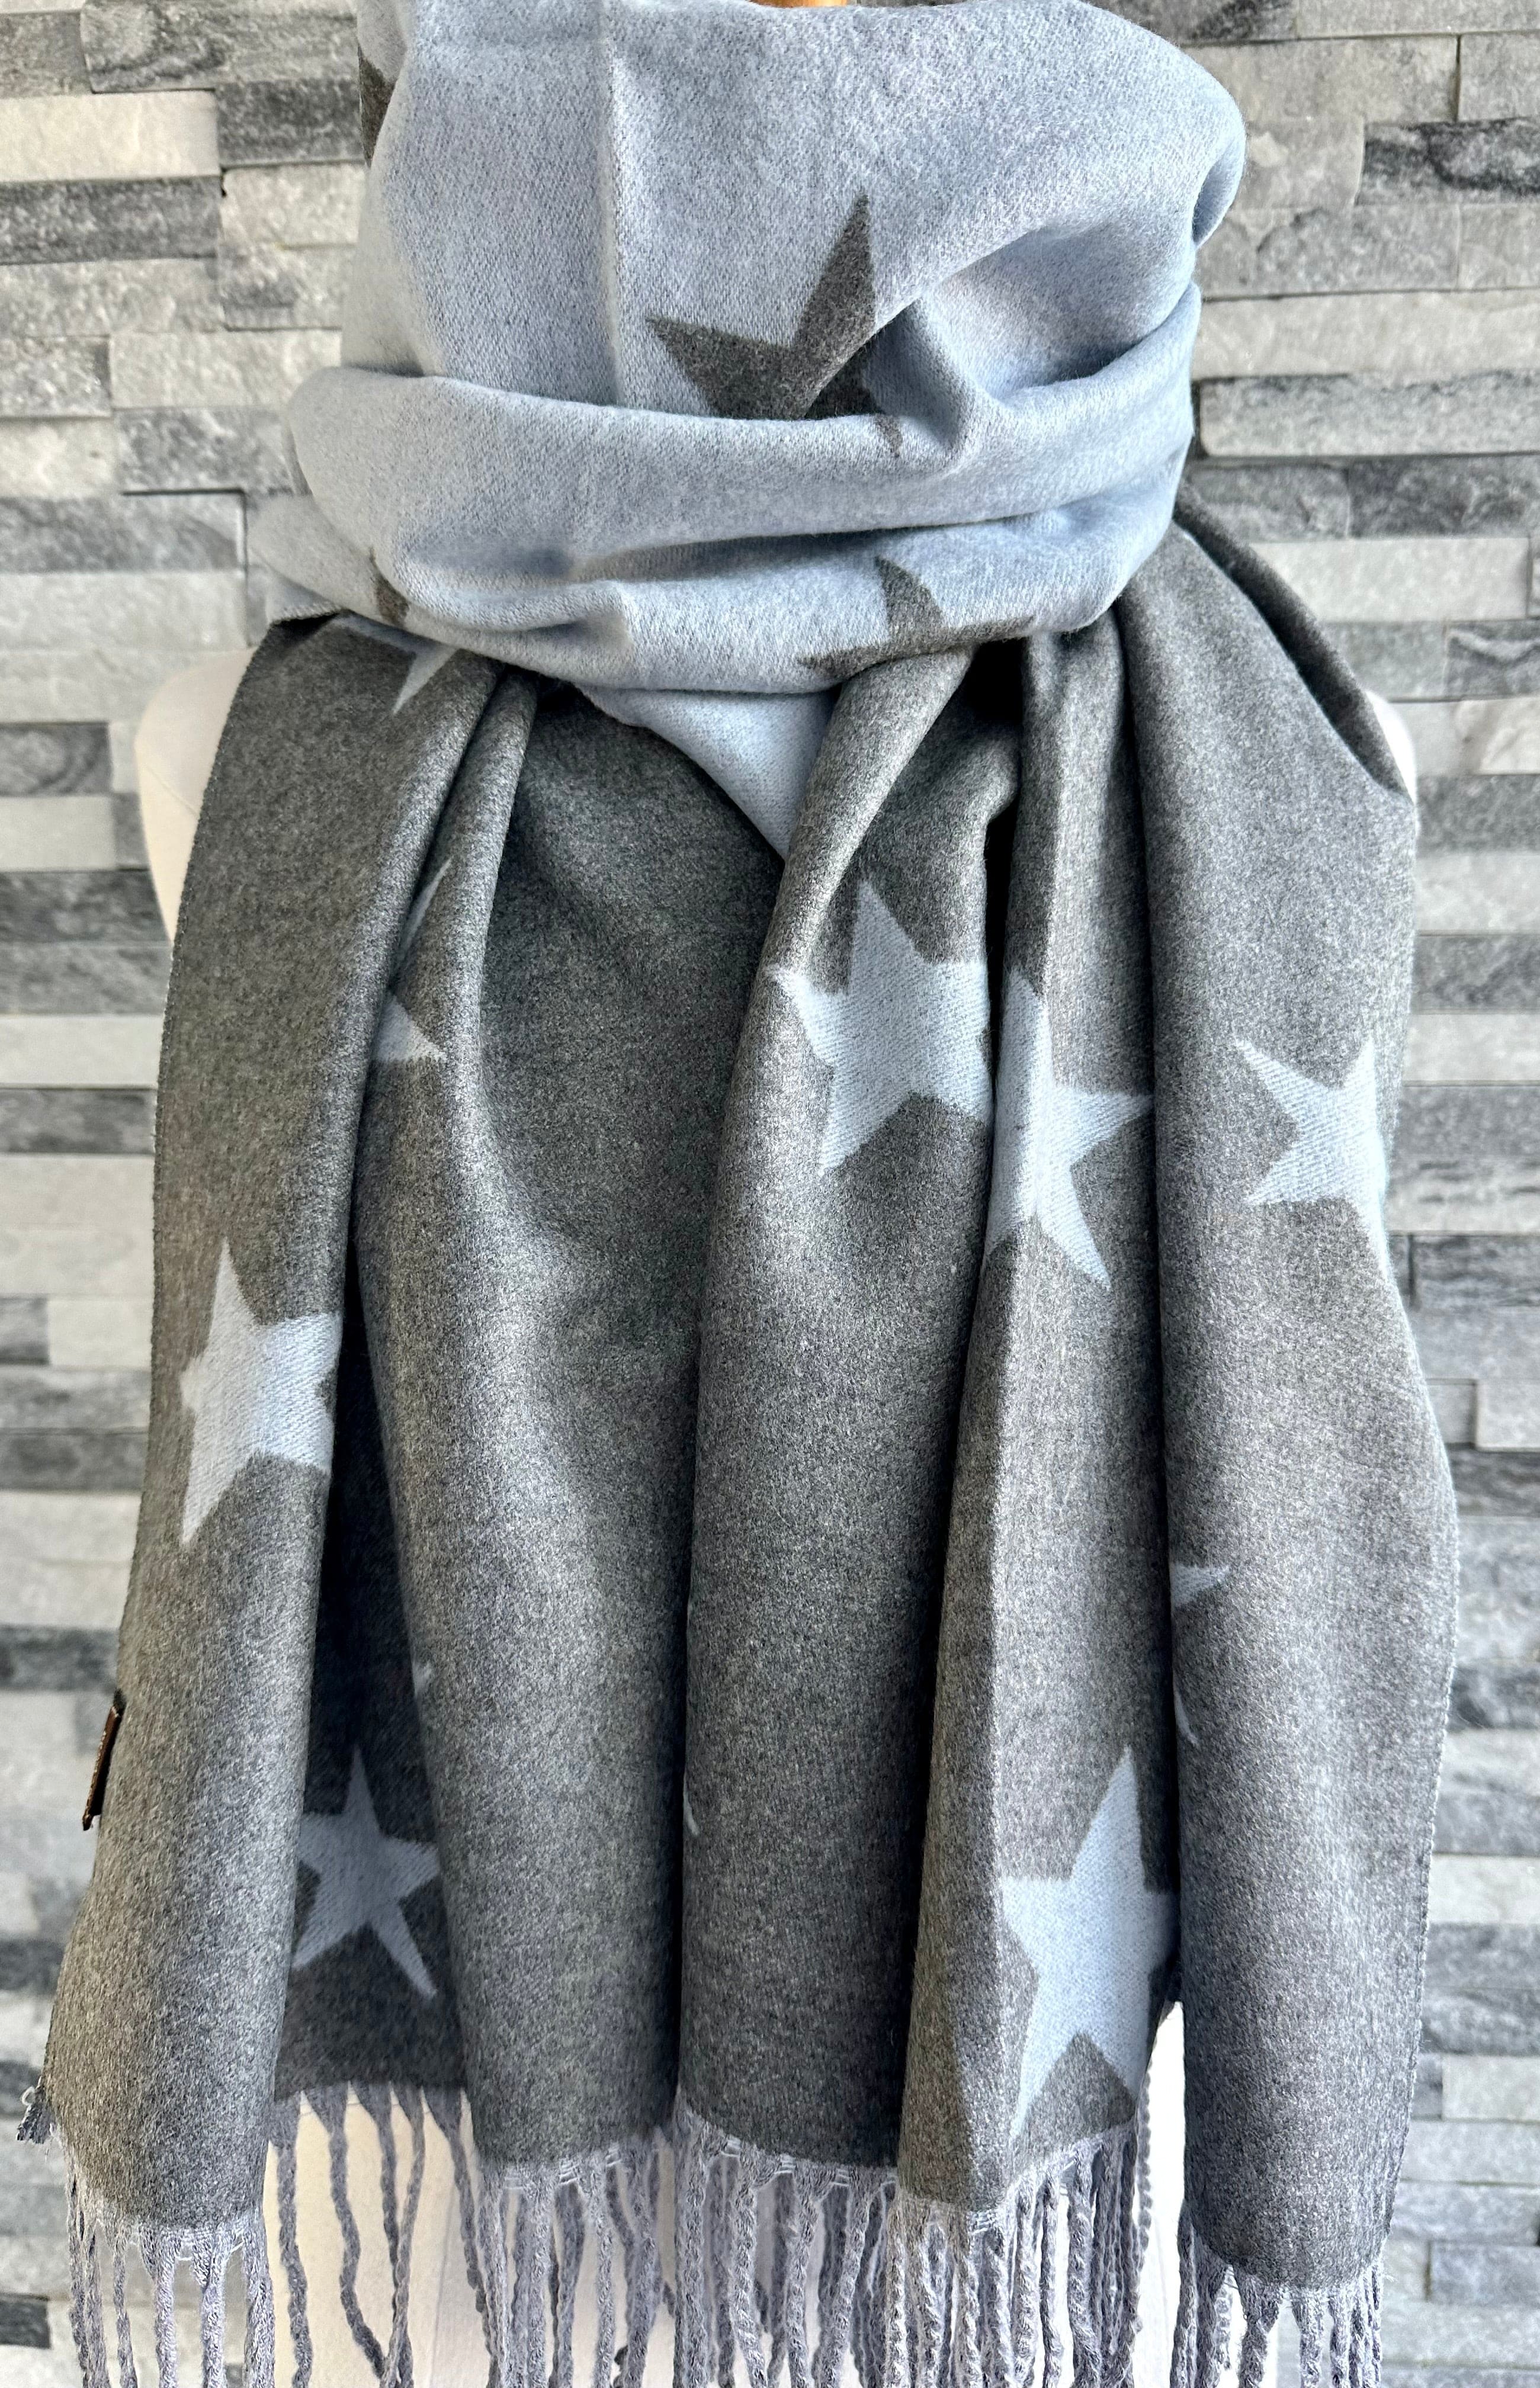 lusciousscarves Reversible Pale Blue and Grey Stars Scarf/Shawl Cashmere Blend